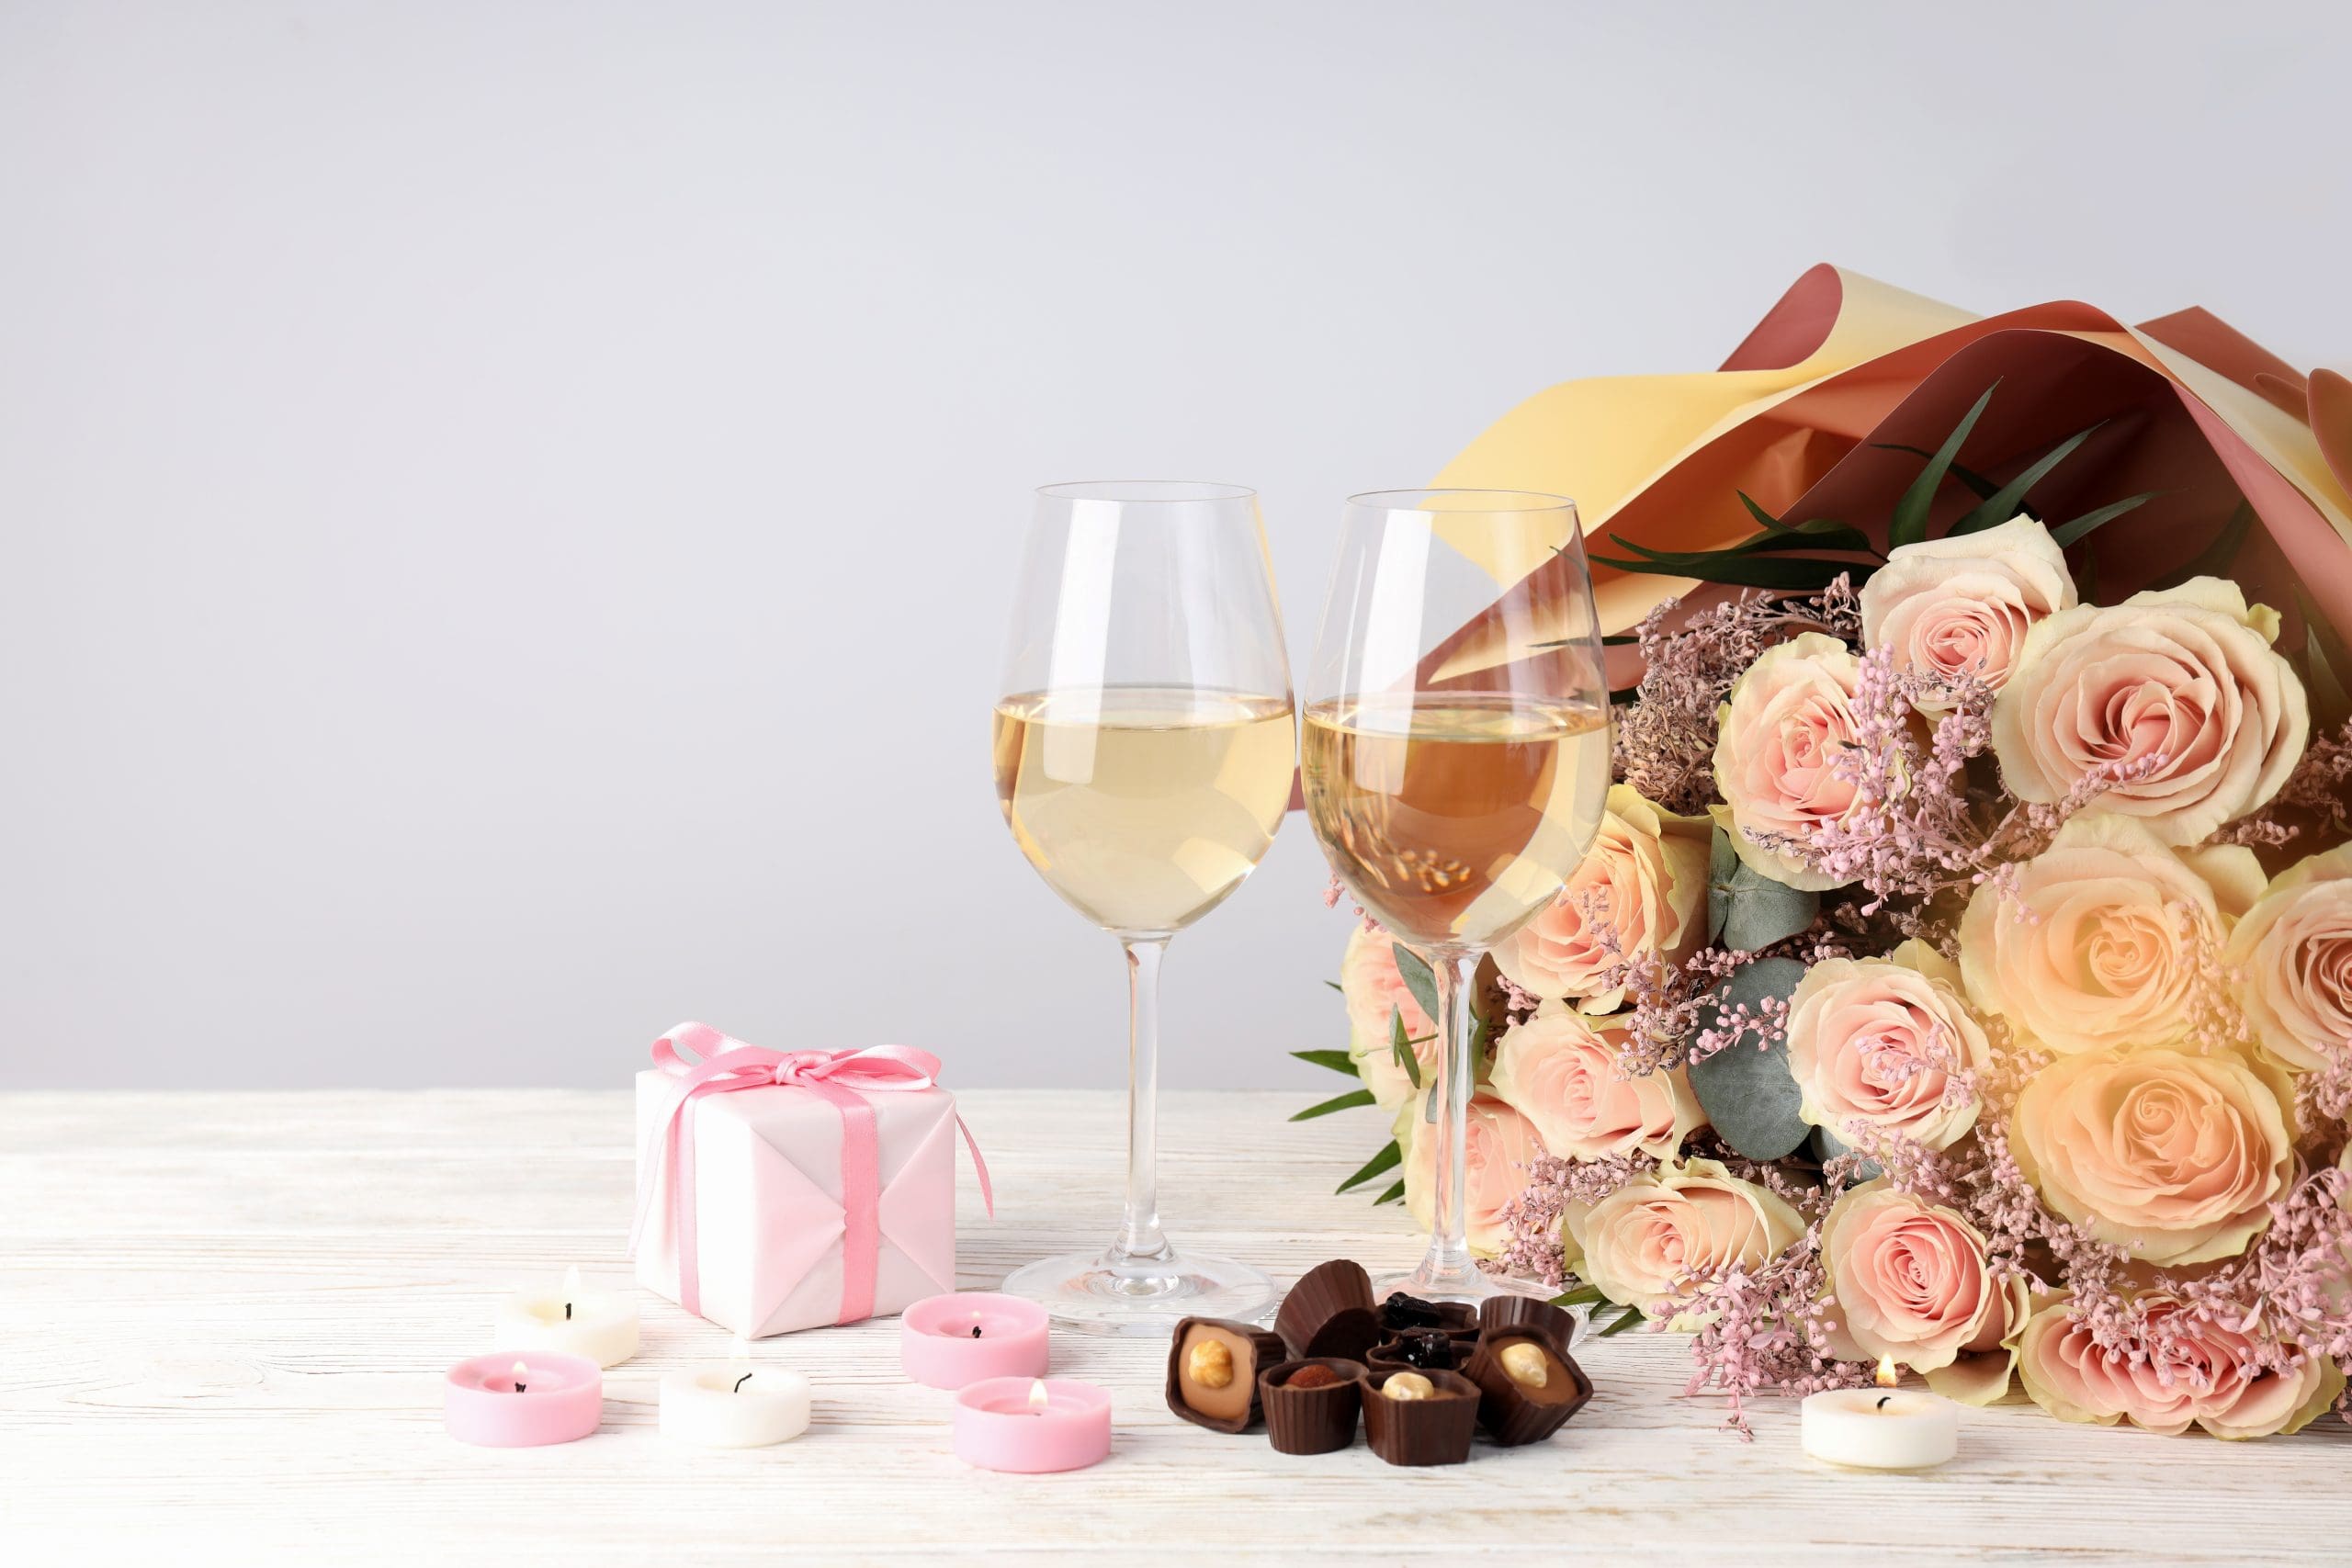 presents, wine, and flowers for couples finding ways to celebrate valentines day at home